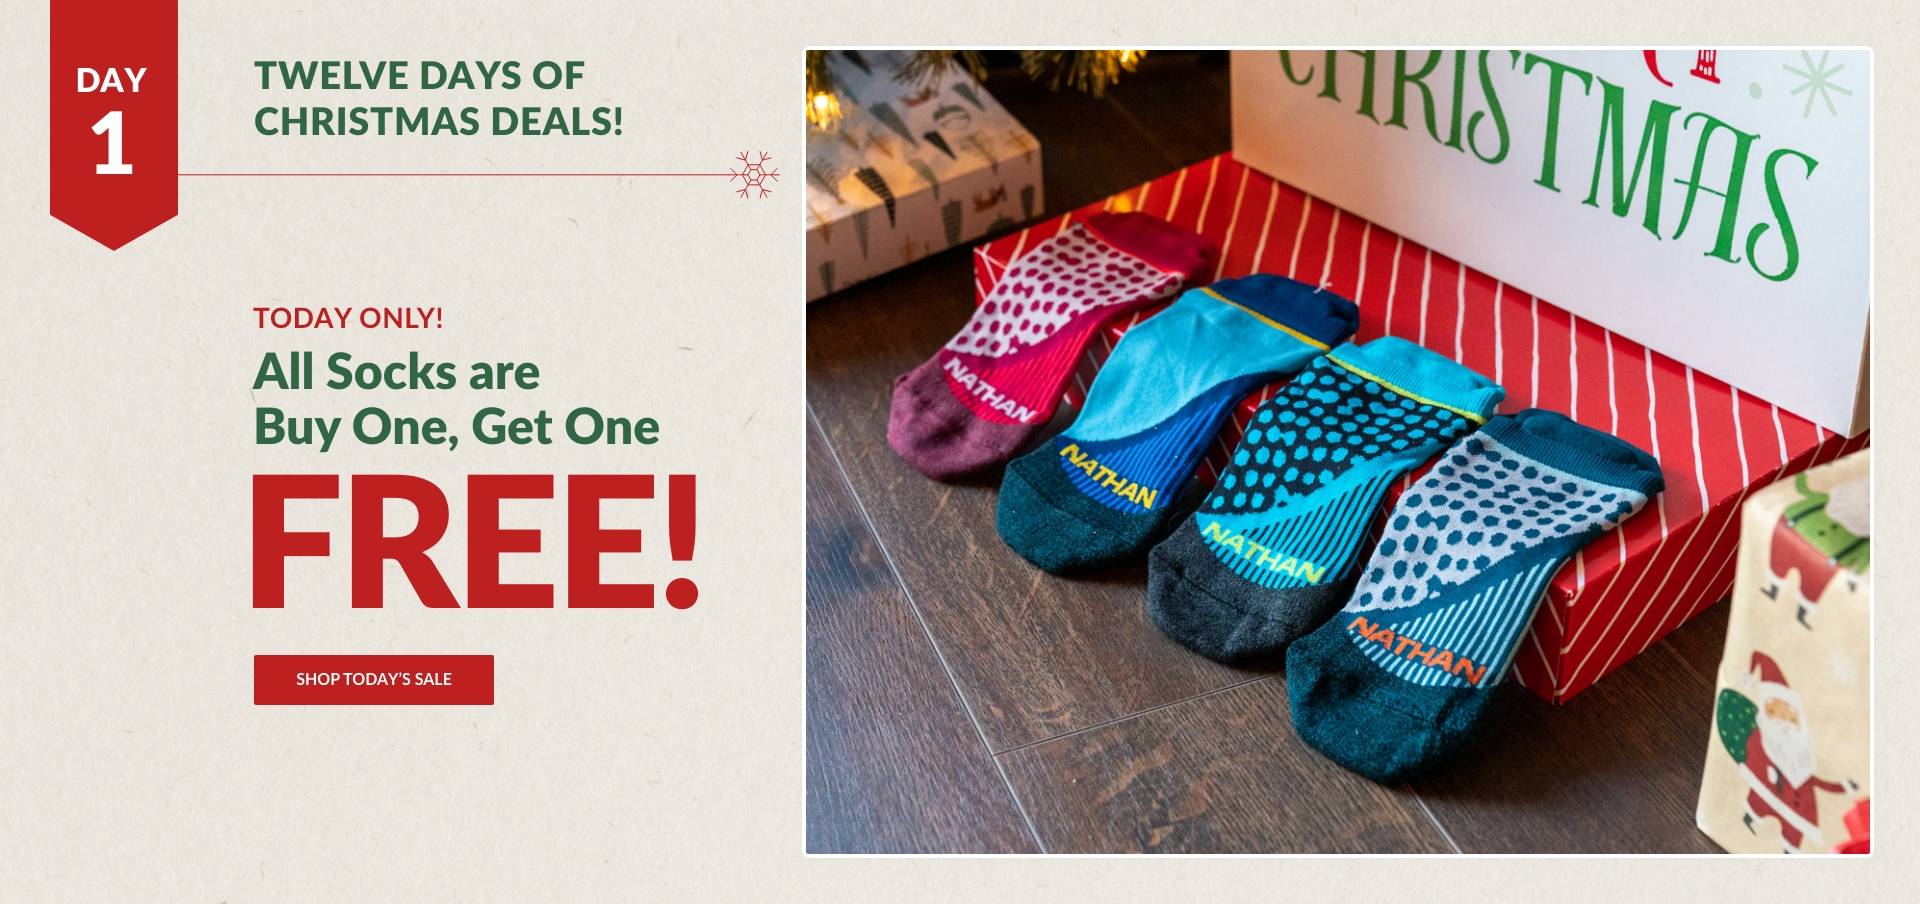 Today Only! All Socks are Buy One, Get One Free - Shop Today's Sale